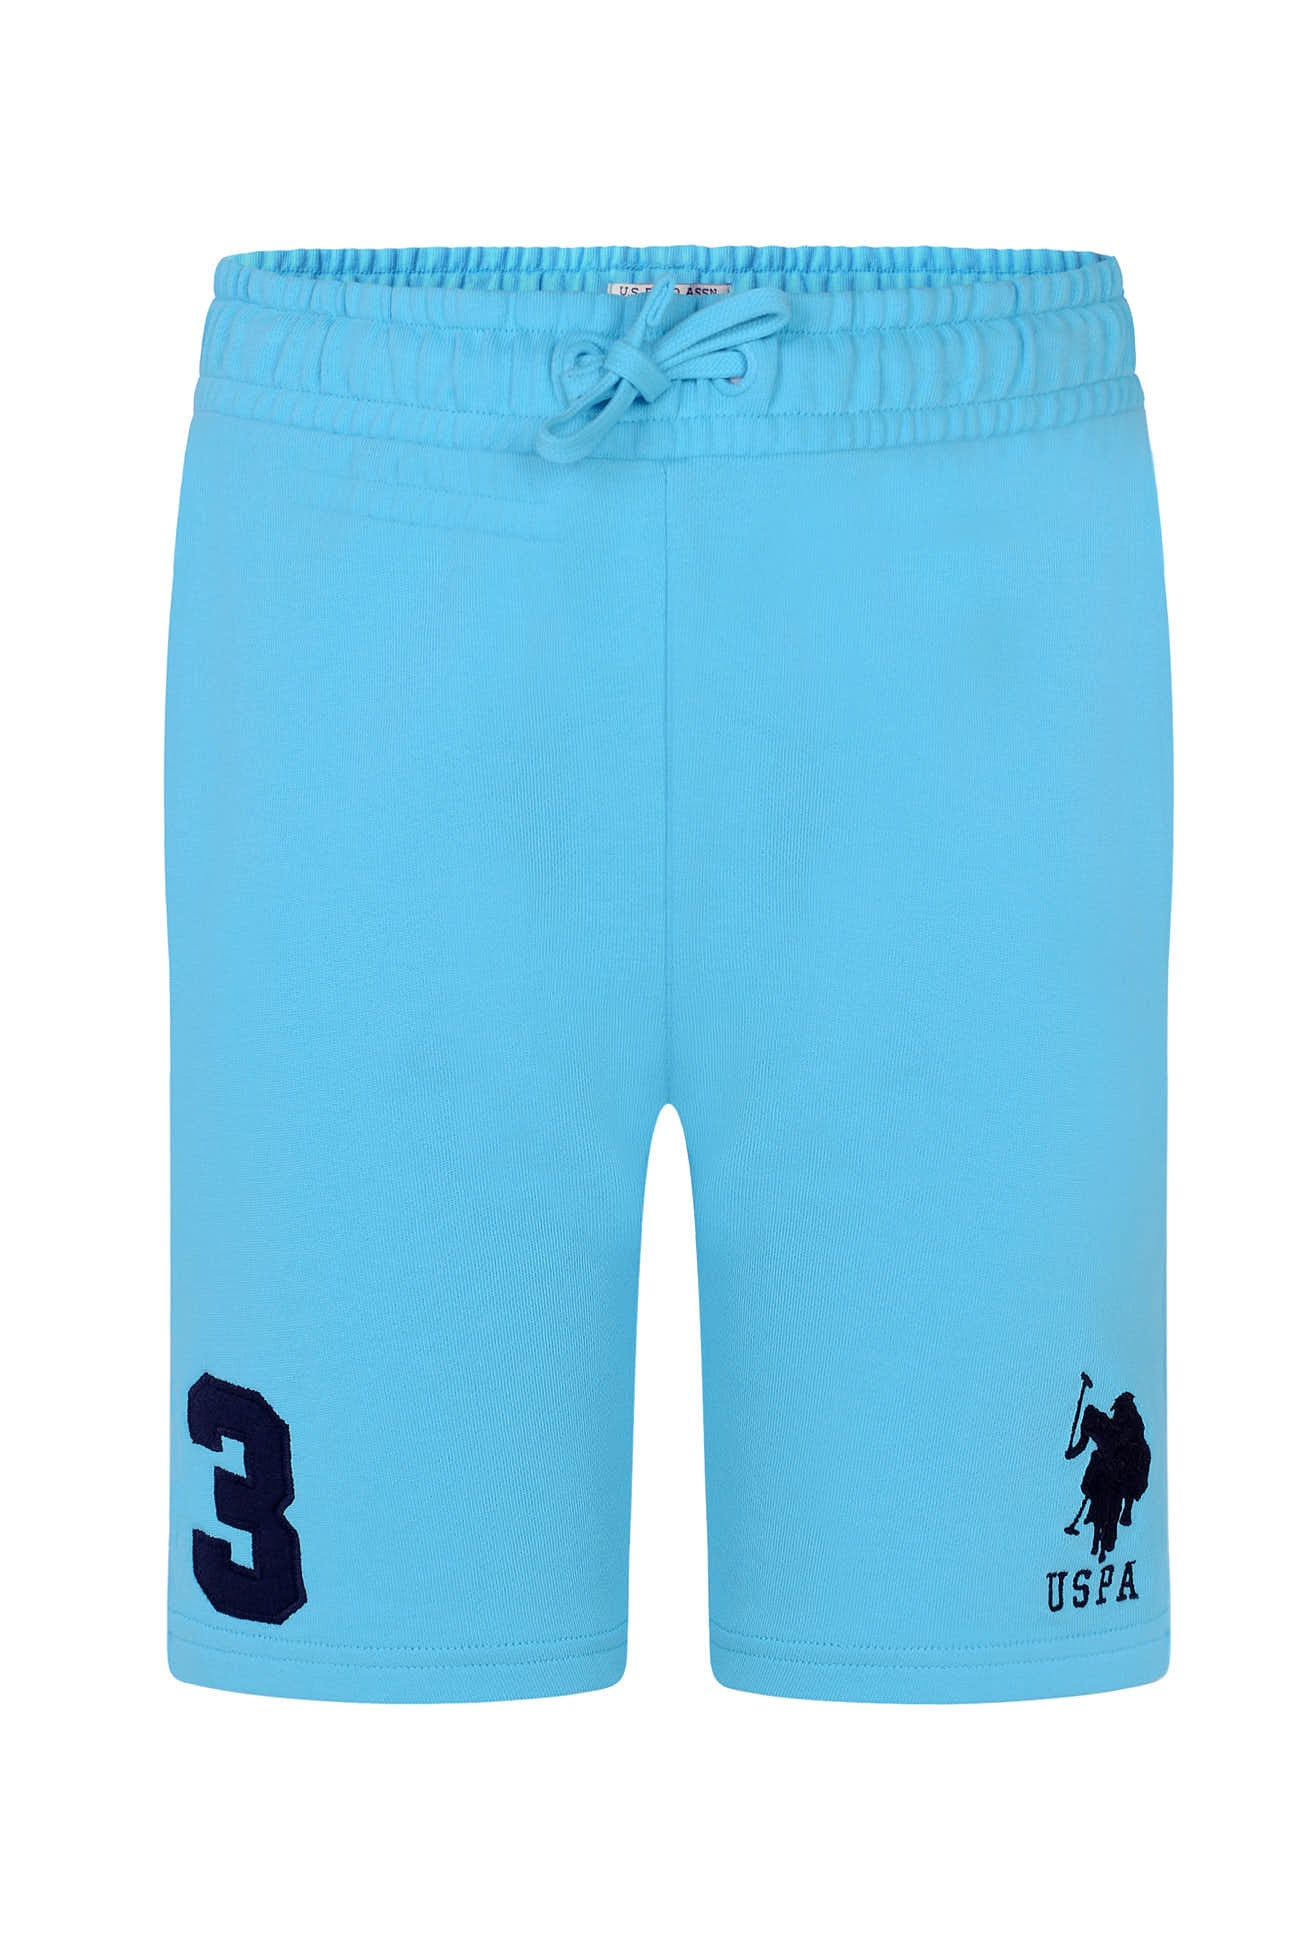 Boys Player 3 Sweat Shorts in Bachelor Button